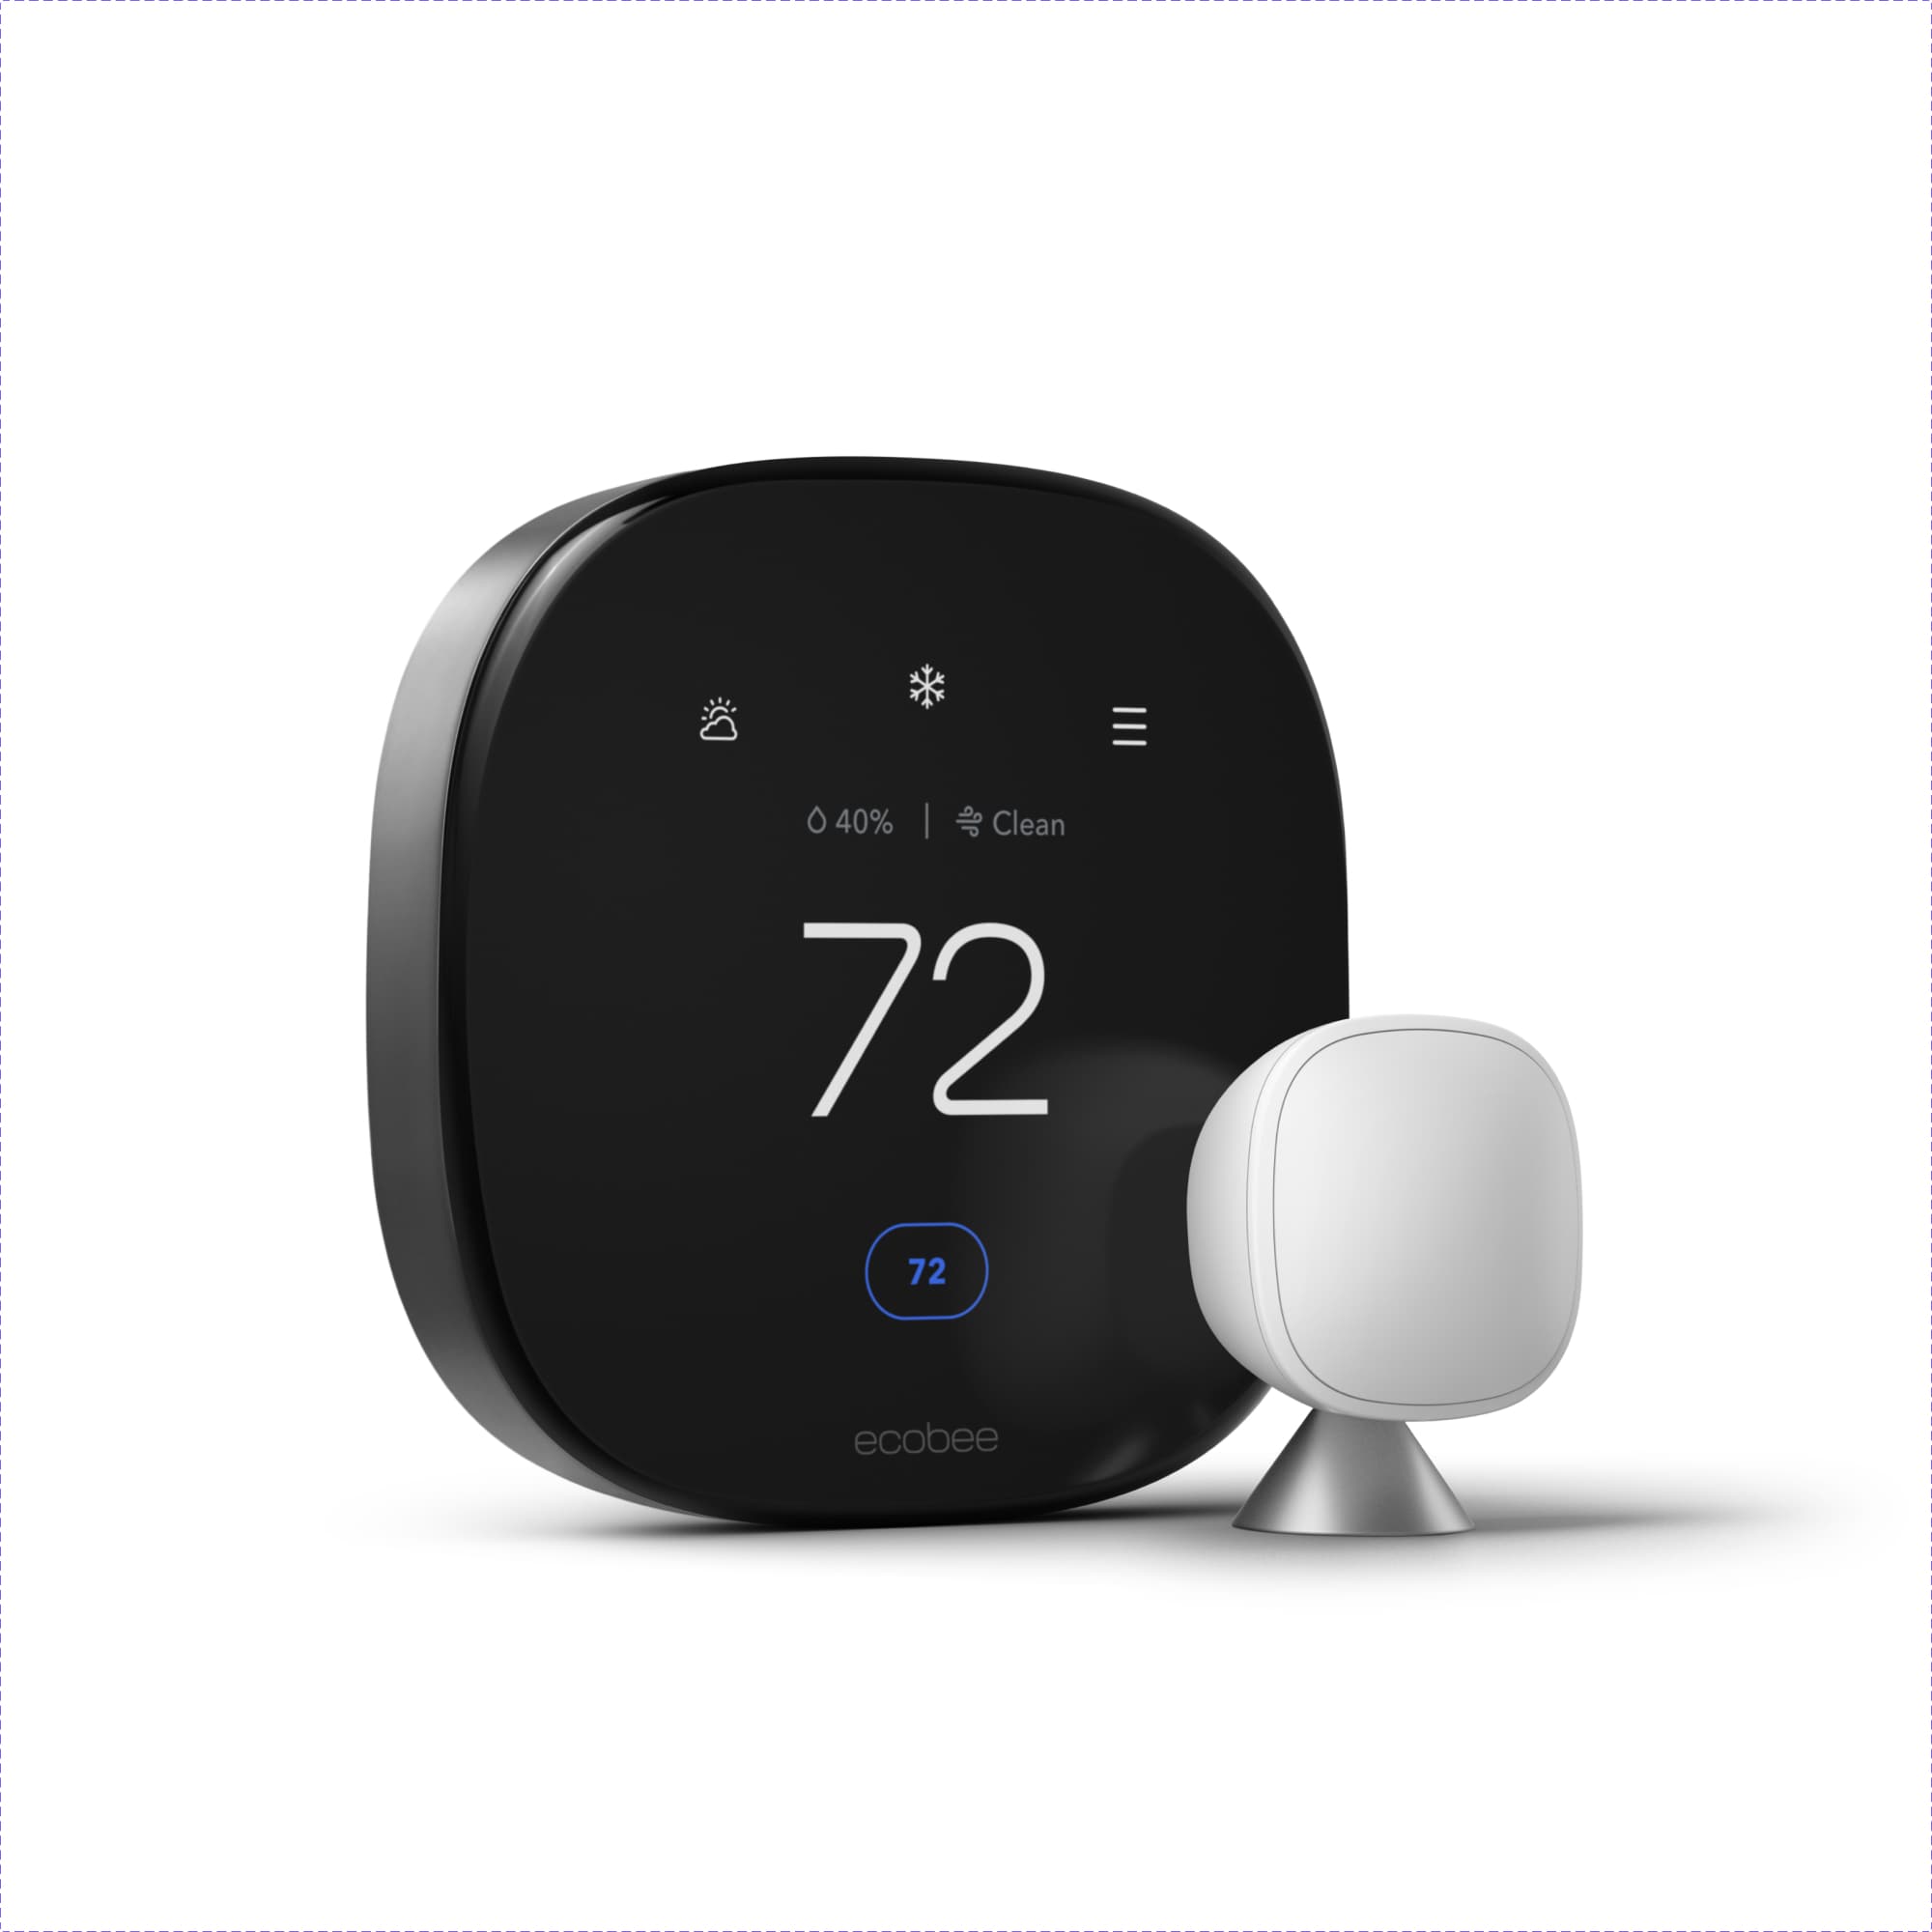 Thermostat and room sensor Smart Thermostats at